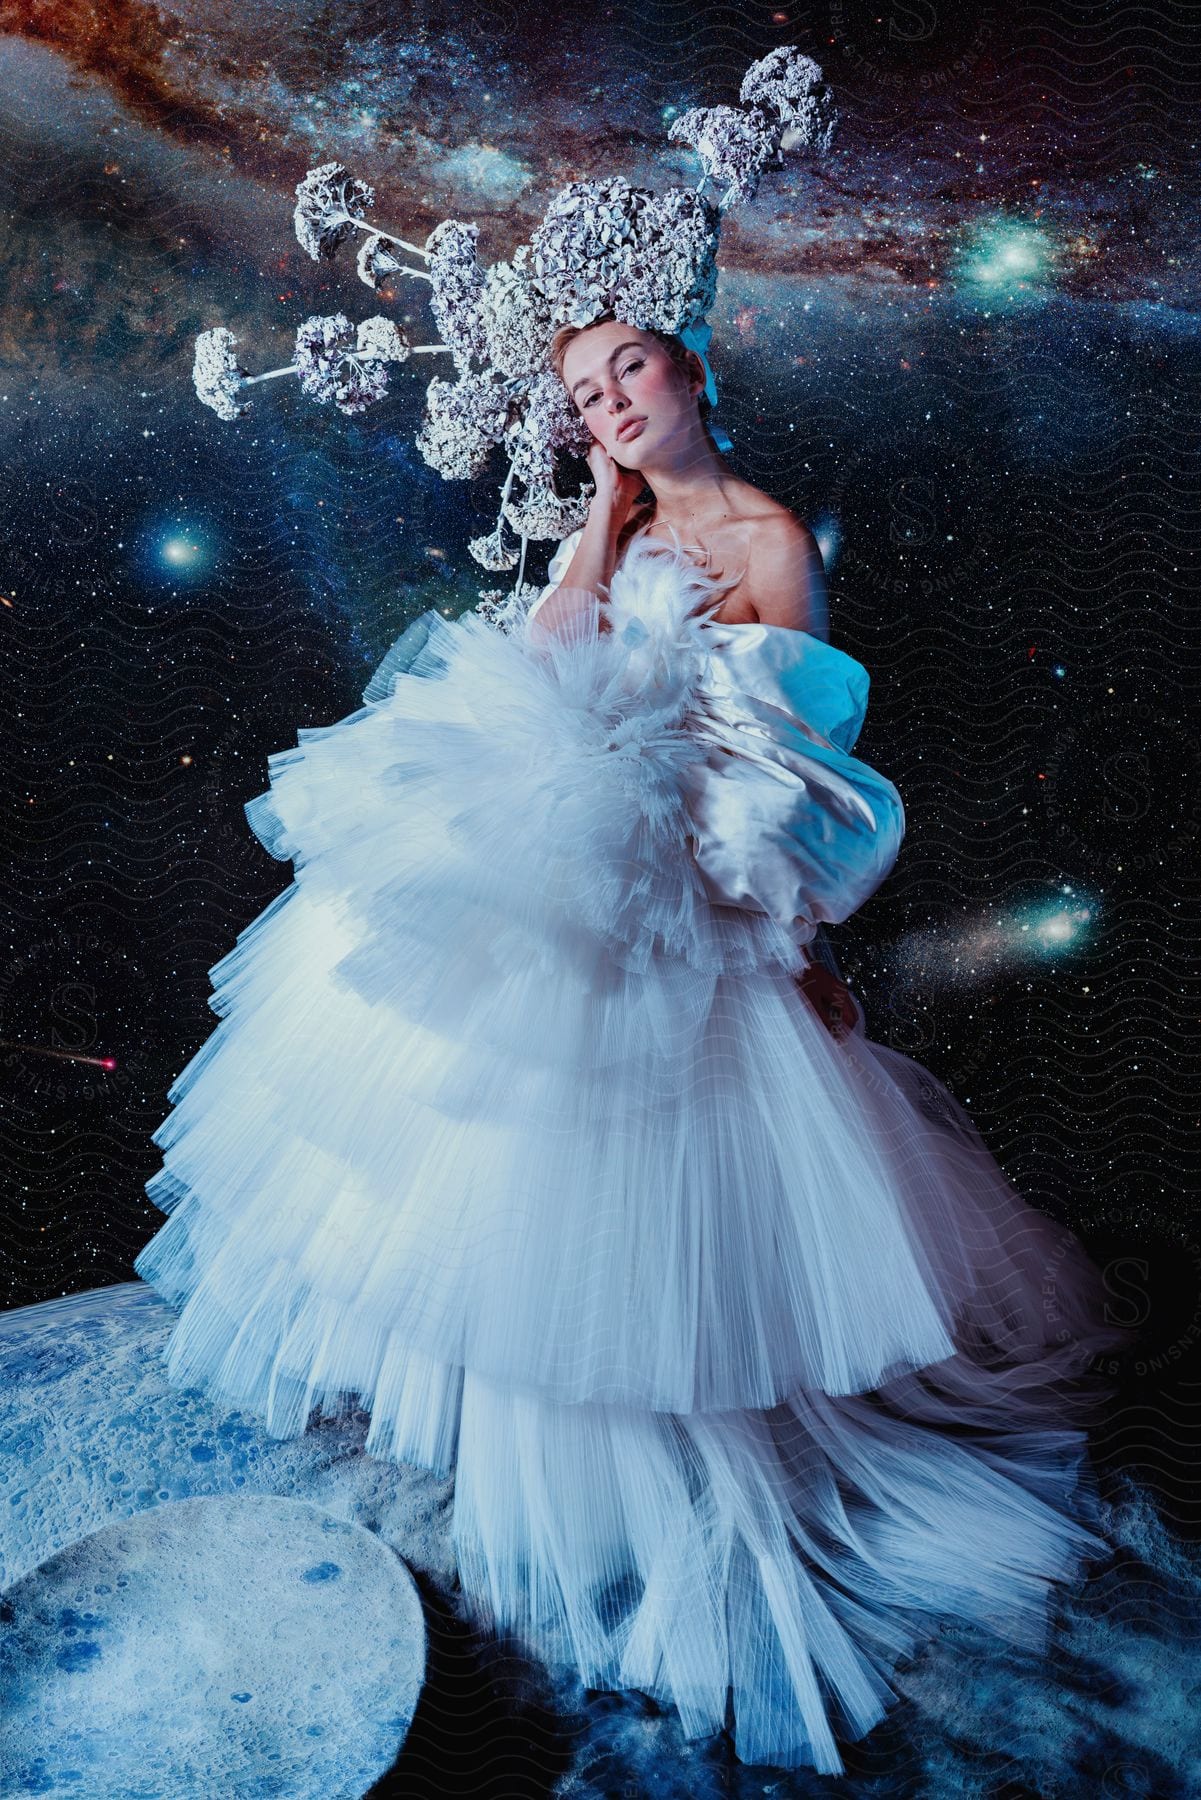 A woman wearing a fluffy white dress and an elaborate headdress of plants is standing on a planet with galaxies in the distance